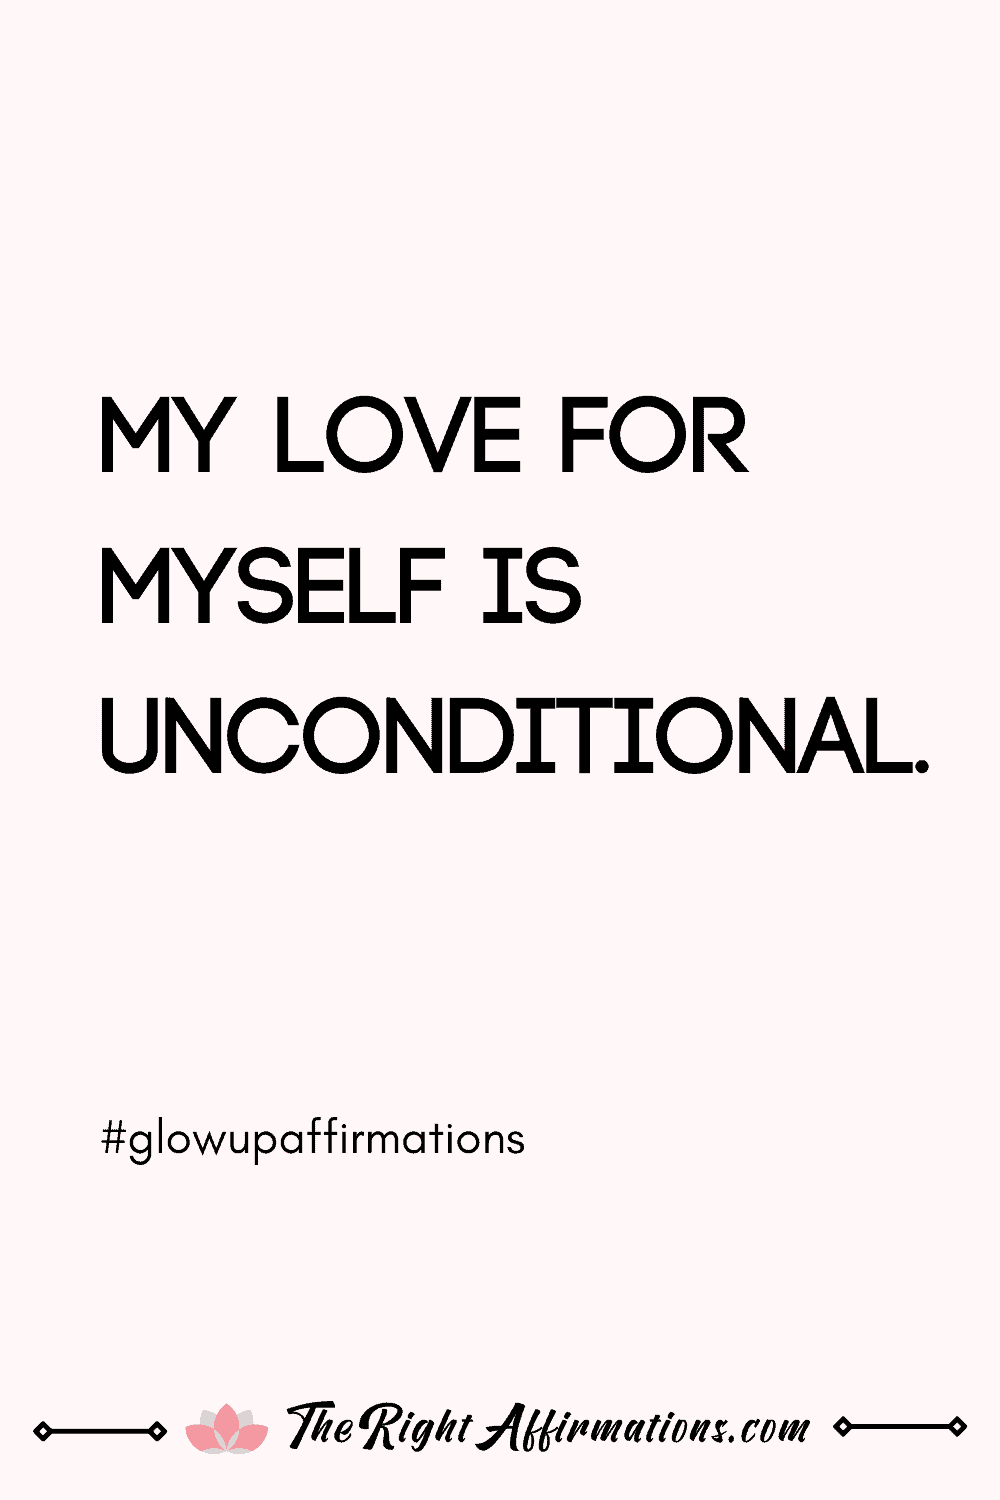 affirmations for a glow up